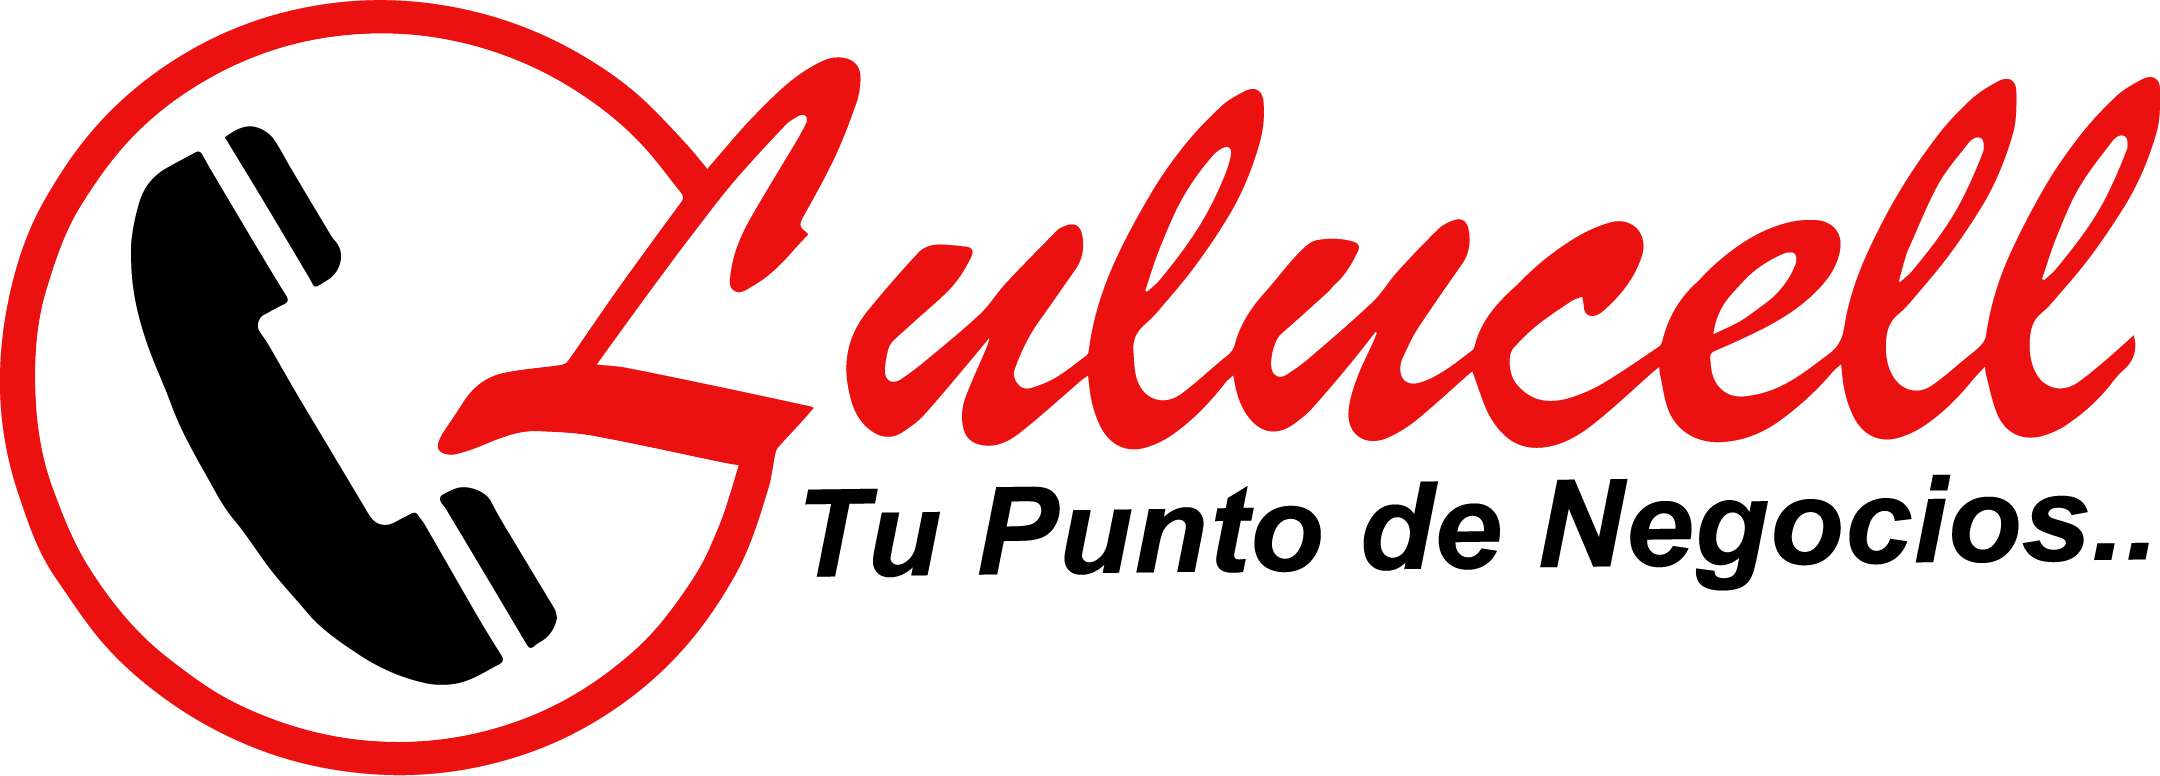 Lulucell